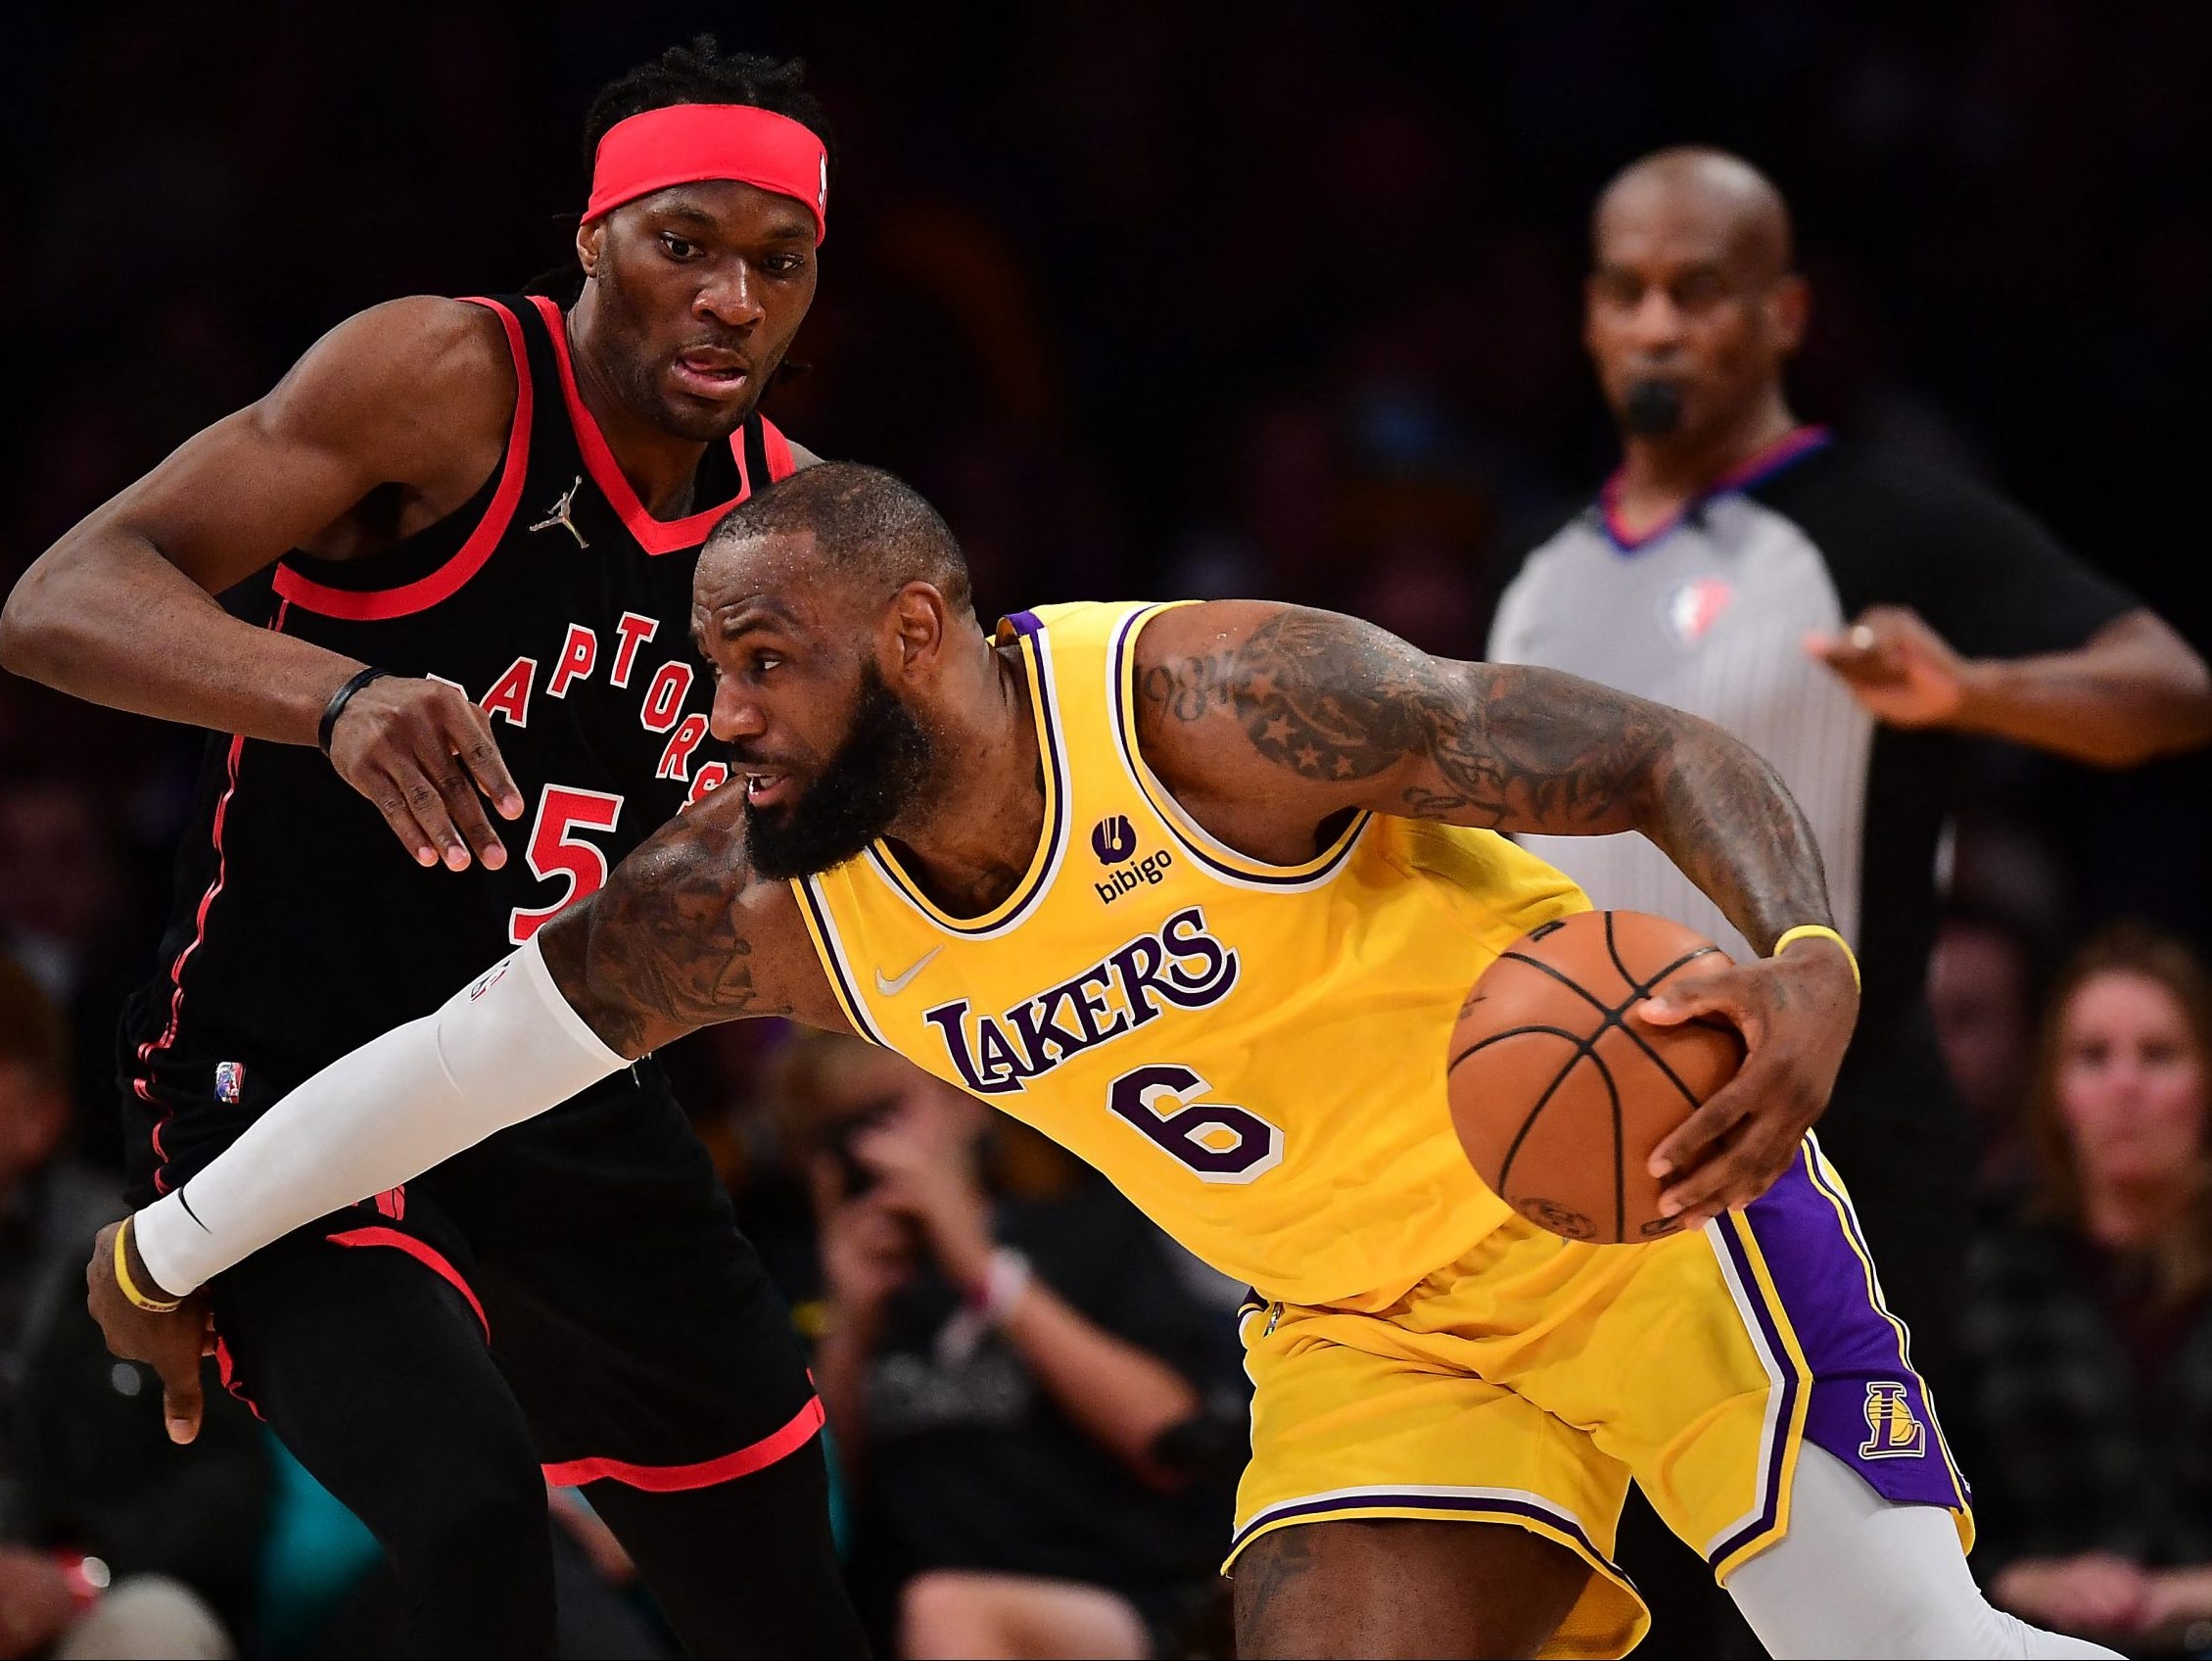 Barnes, Raptors all over Lakers early in 114-103 victory 